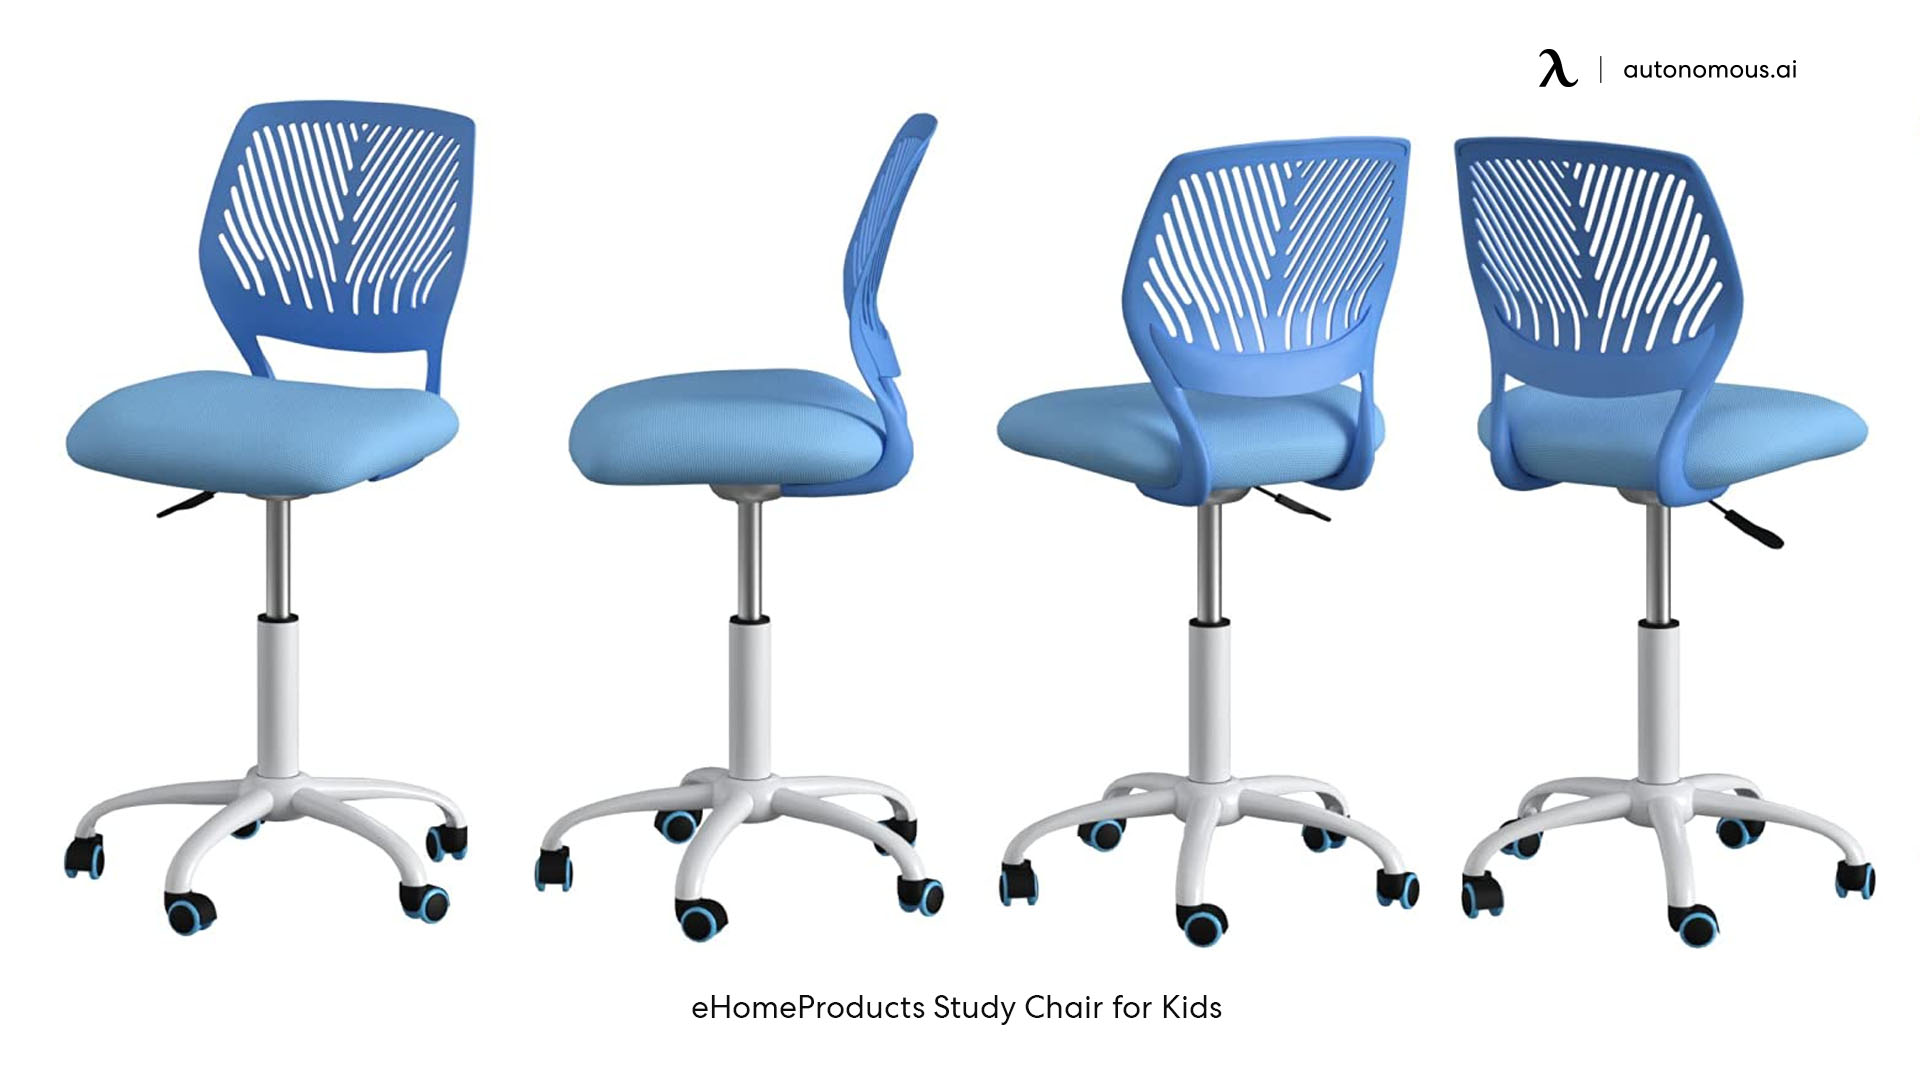 eHomeProducts Study Chair for Kids